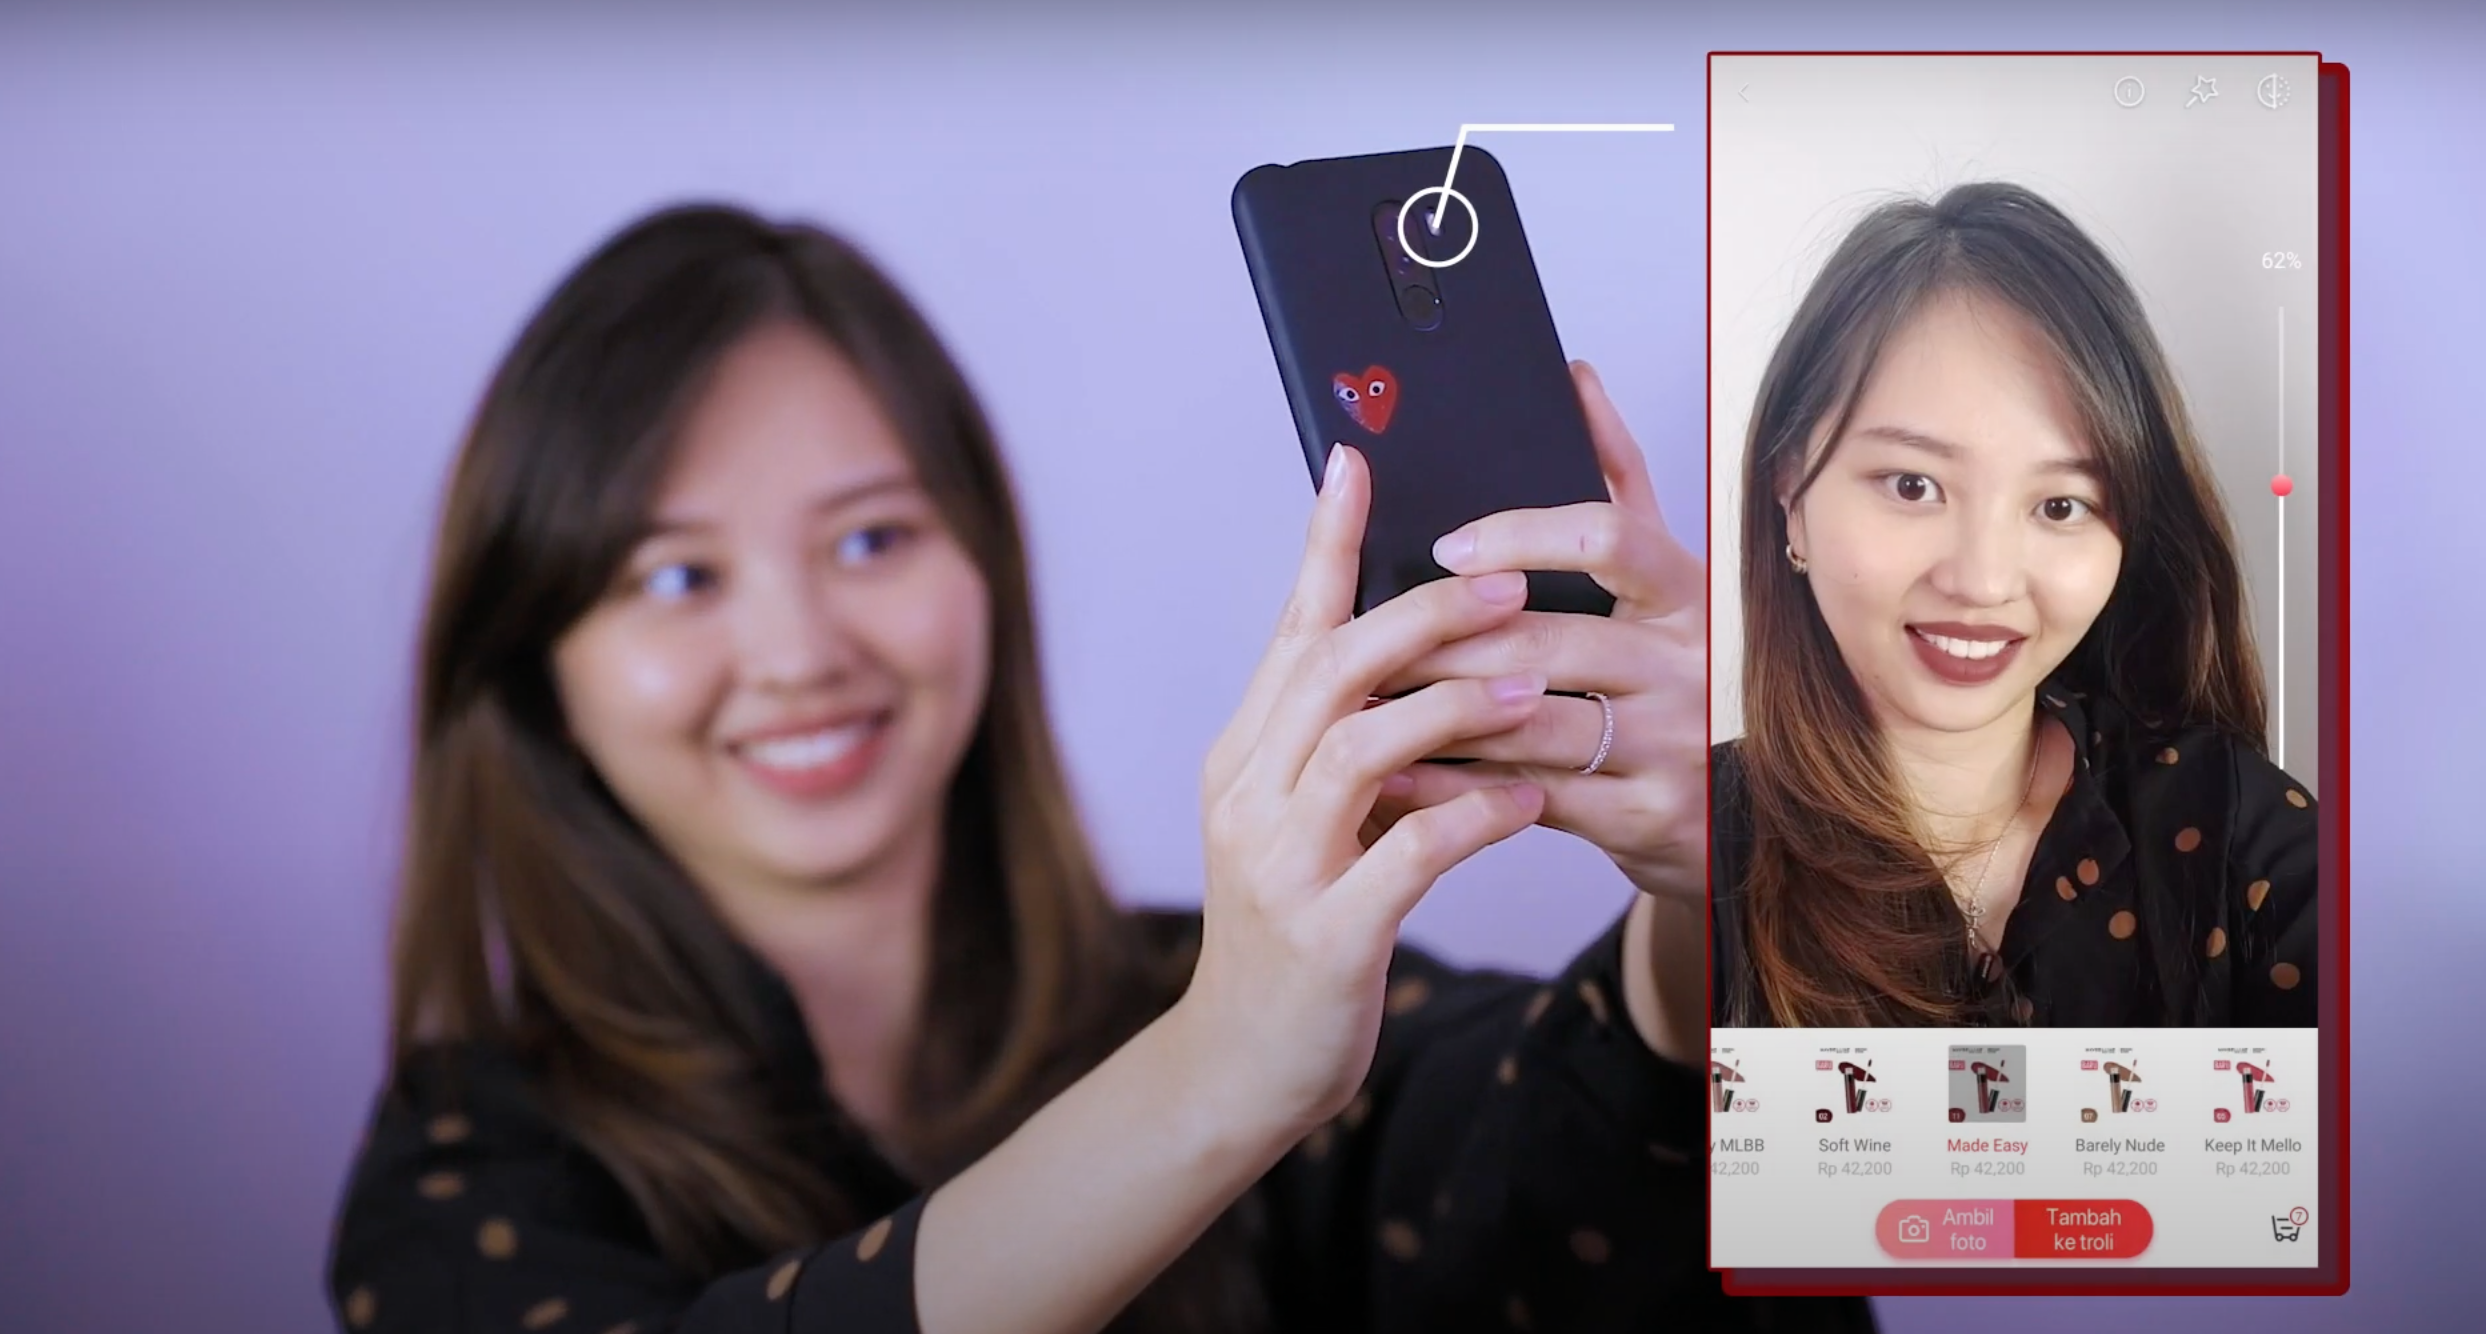 New feature, new look: can augmented reality boost sales of beauty products?